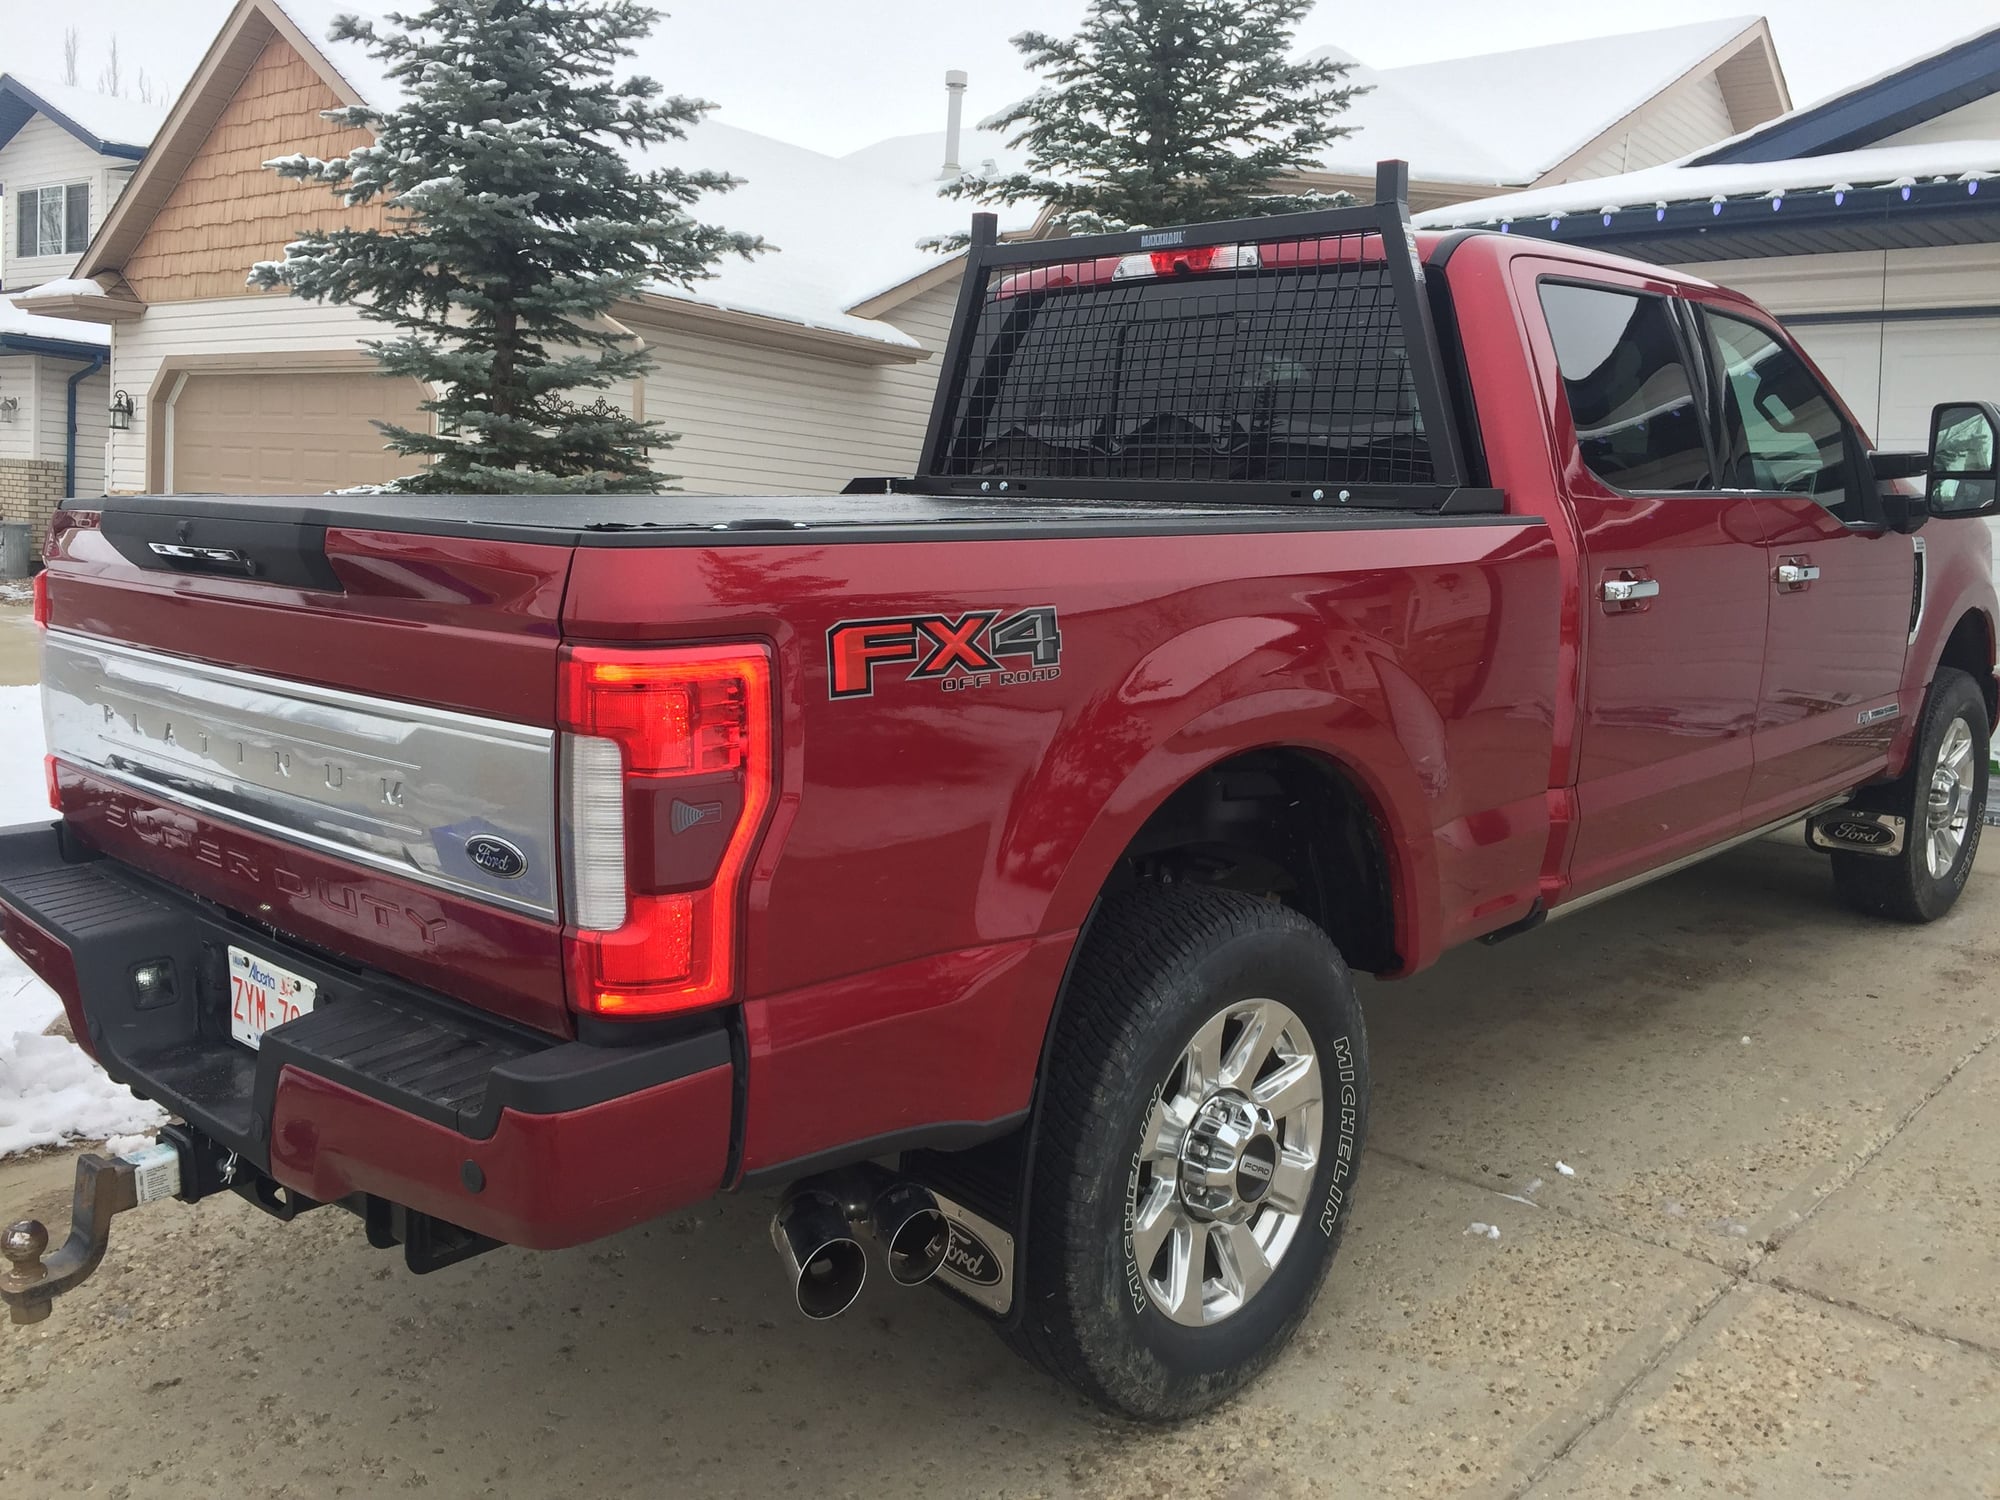 2017 Ford F-350 Super Duty - 2017 F350 6.7, Ruby Red, Loaded, Platinum, Ultimate. - Used - VIN 1ft8w3bt4heb54705 - 8 cyl - 4WD - Automatic - Truck - Red - Red Deer, AB T4R2W9, Canada